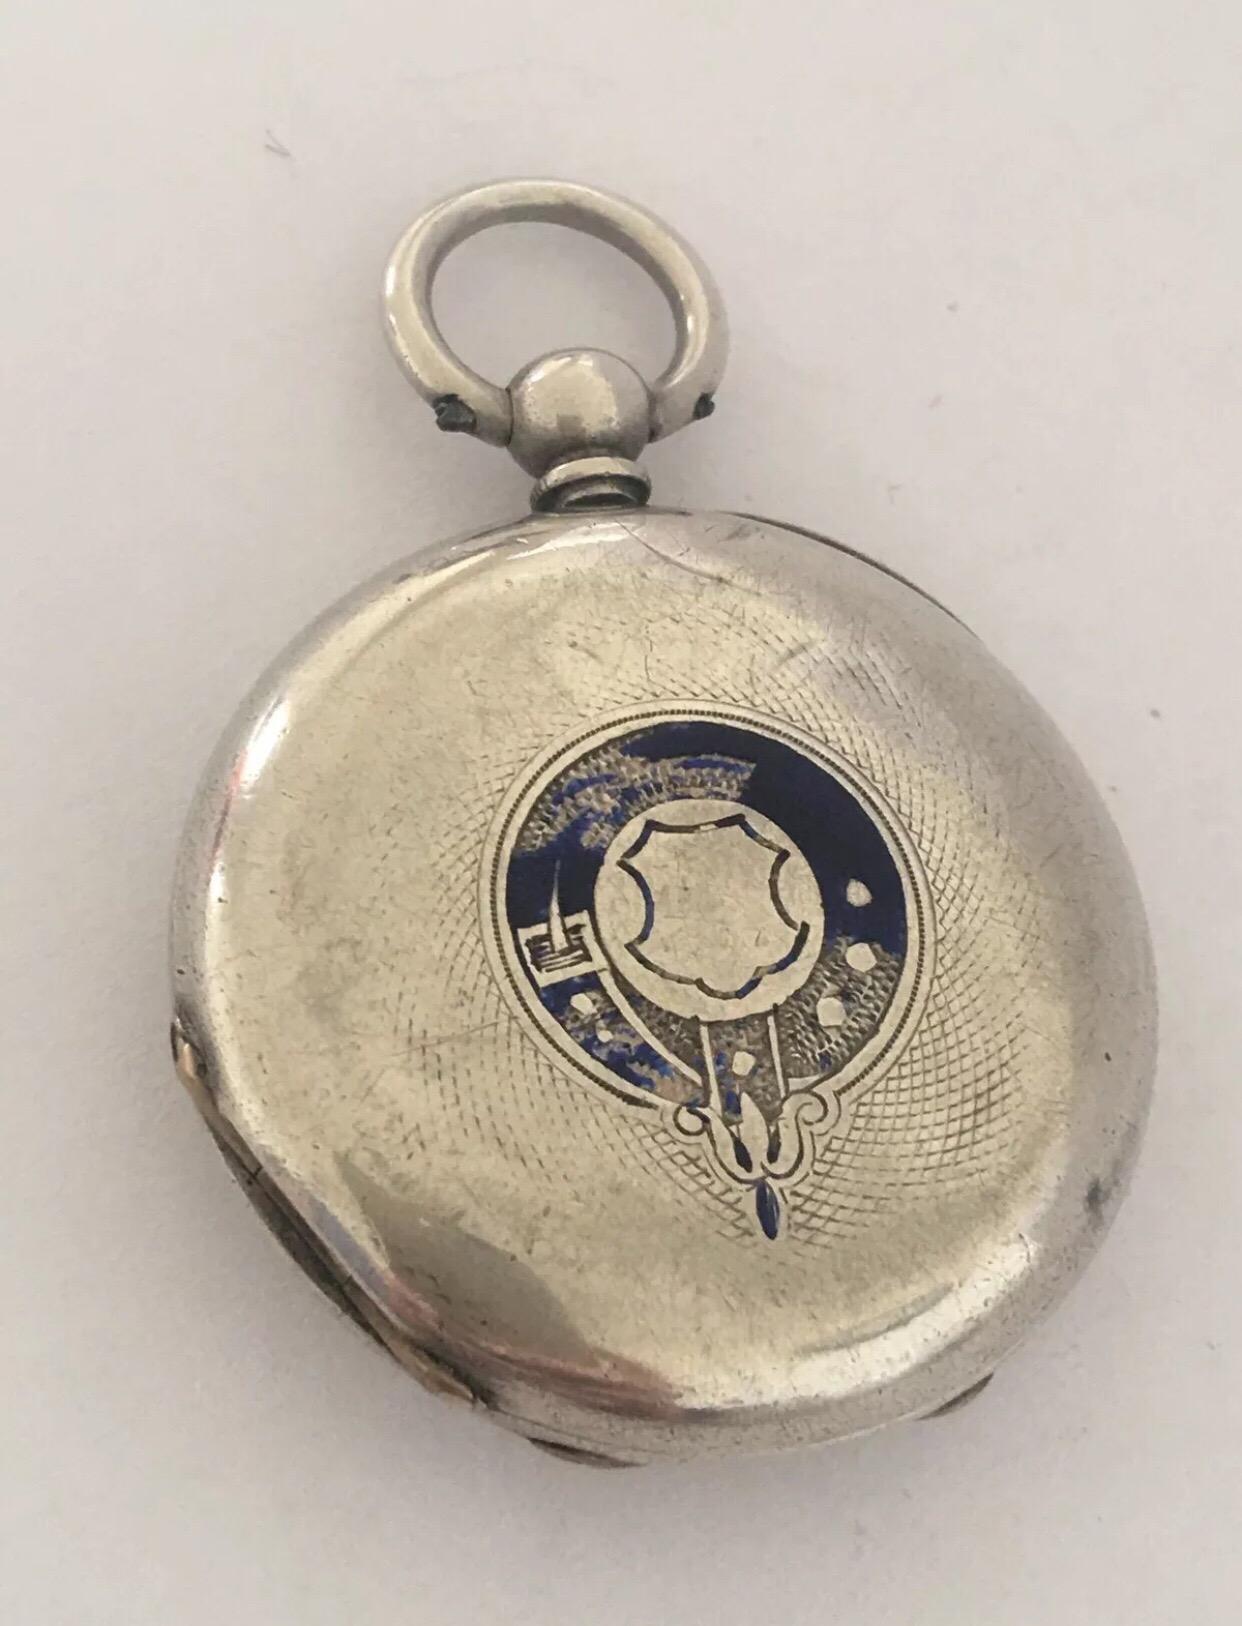 Antique Key-wind Silver Half Hunter Pocket Watch.


This watch is working and ticking well. The glass is missing. Visible chipped on the back cover blue enamel emblem and few dents on the back cover case